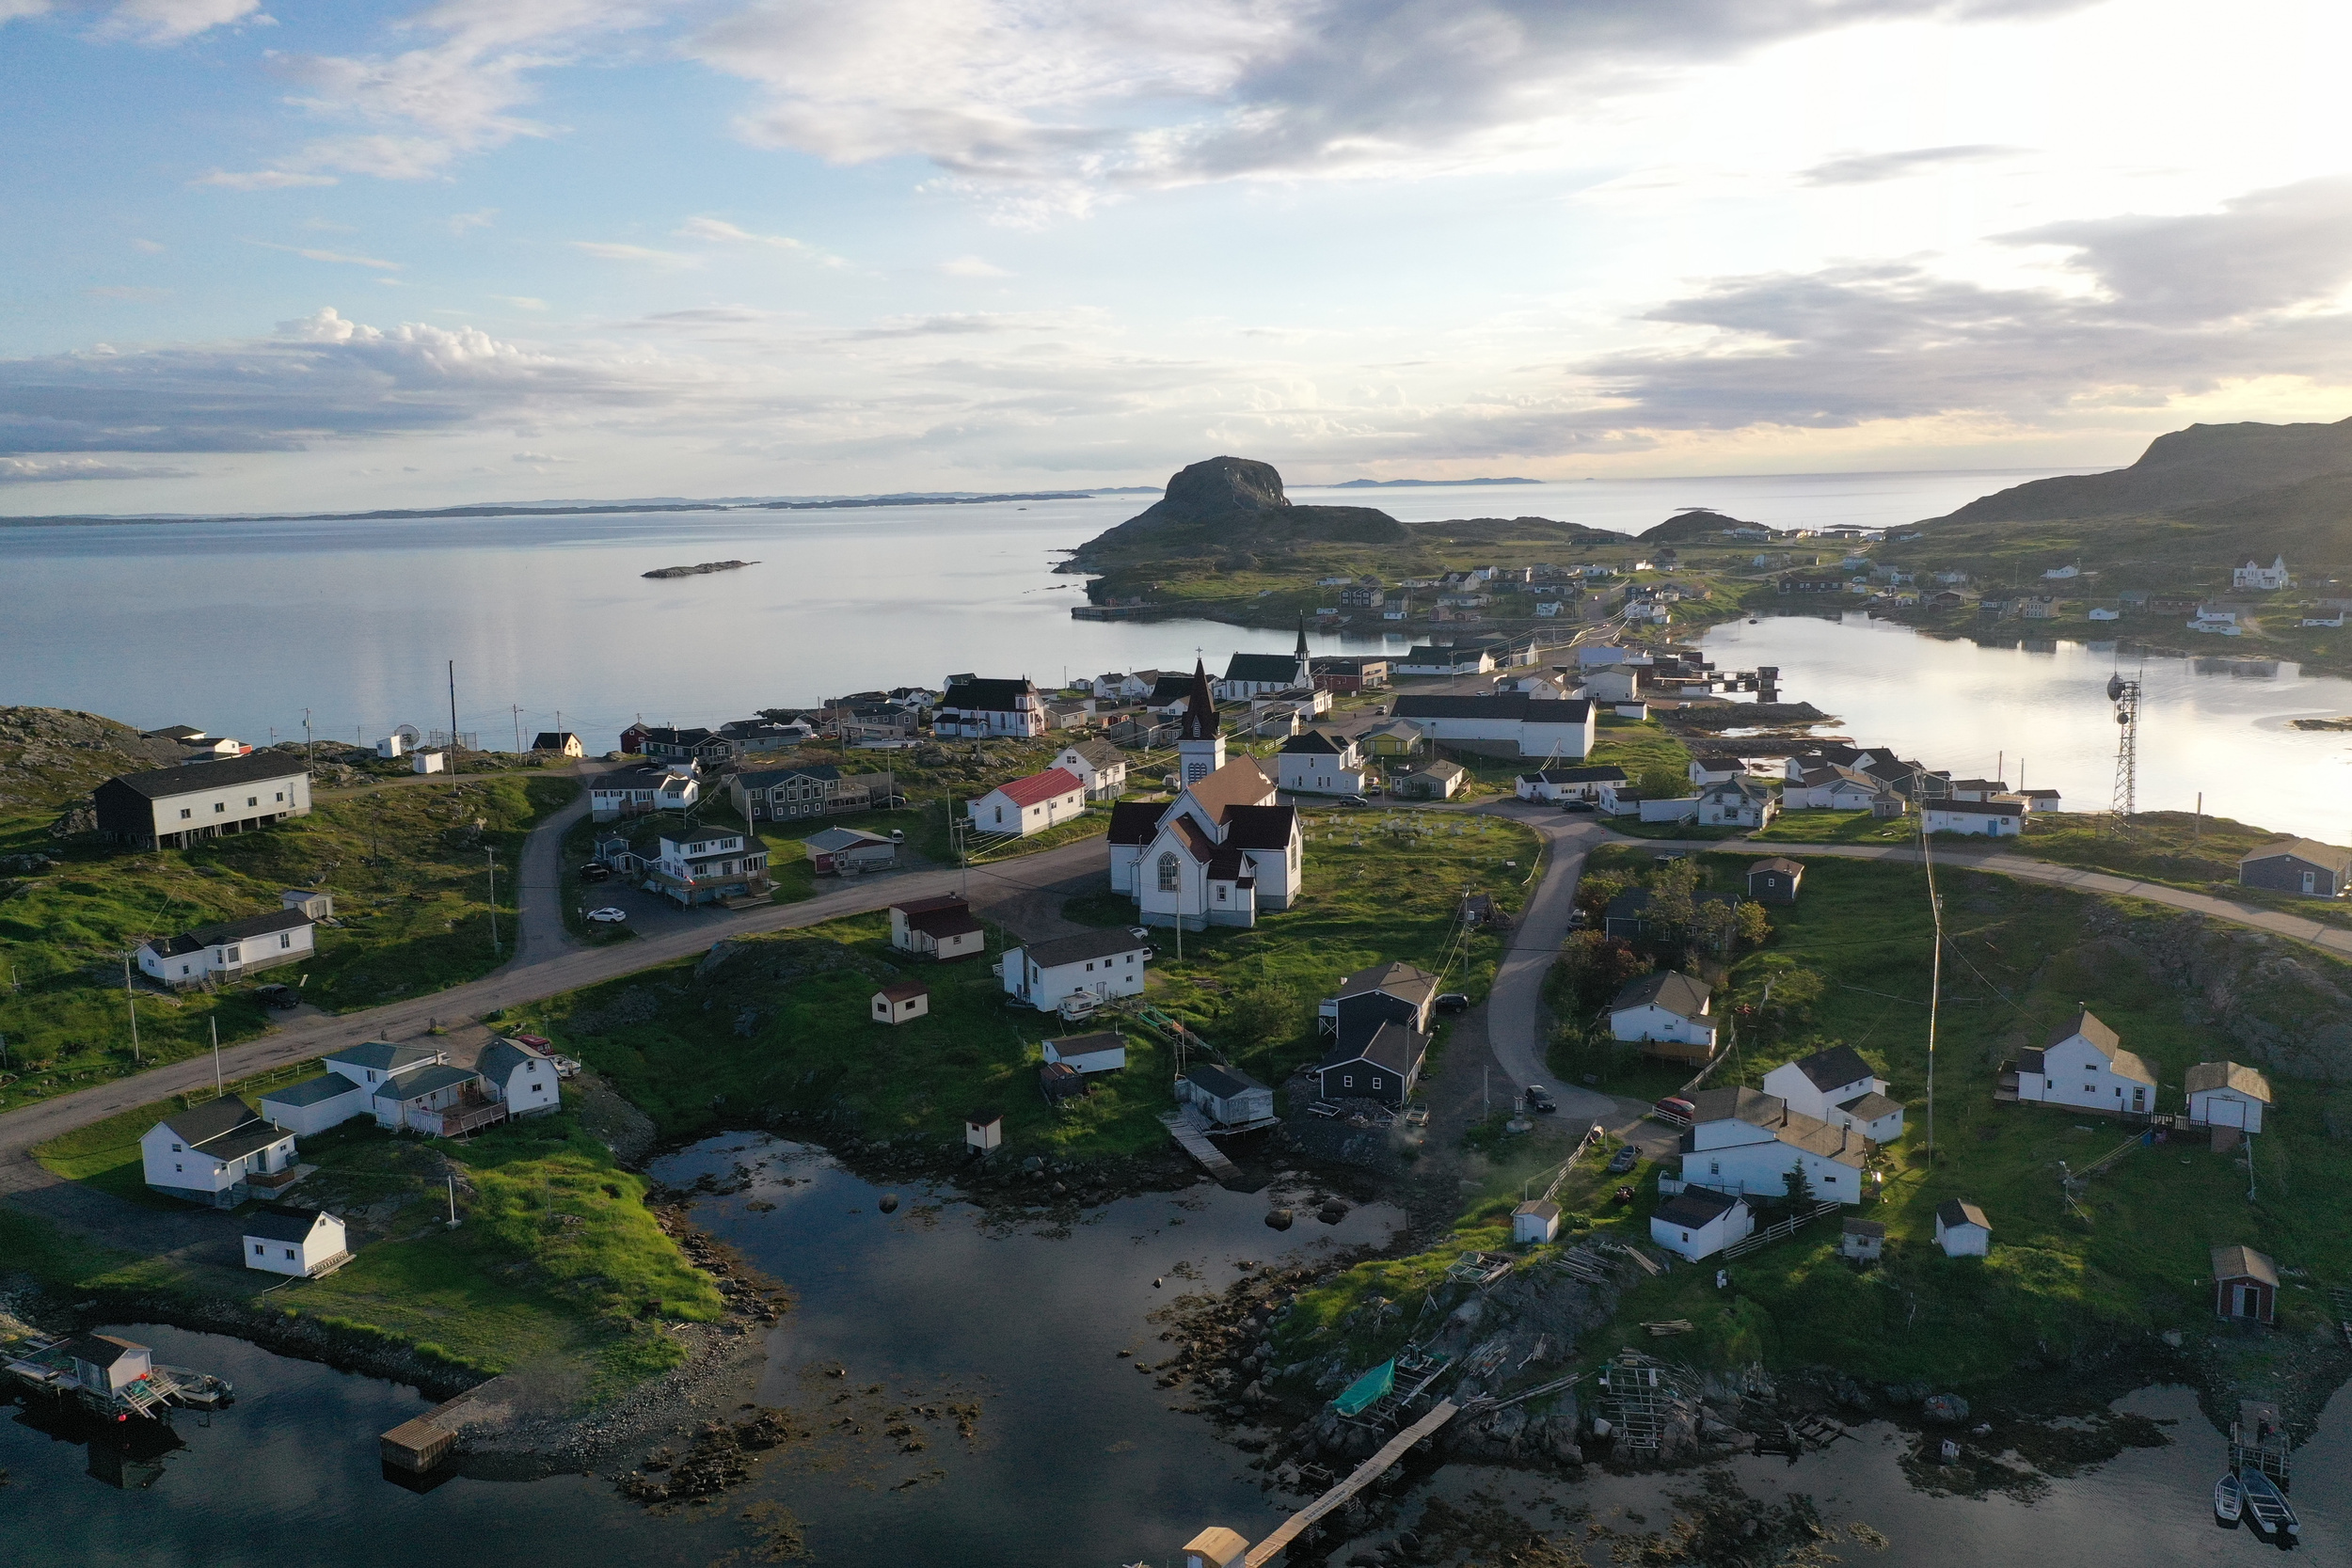 <p>Not all remote islands are tropical paradises. Some, like Fogo Island in Canada, revel in cold weather and rocky landscape. Though more accessible to United States citizens than some remote islands, Fogo Island is still nestled away from mass civilization and a nice break from the hustle and bustle of typical North American life.</p><p><a href='https://www.msn.com/en-us/community/channel/vid-cj9pqbr0vn9in2b6ddcd8sfgpfq6x6utp44fssrv6mc2gtybw0us'>Follow us on MSN to see more of our exclusive lifestyle content.</a></p>